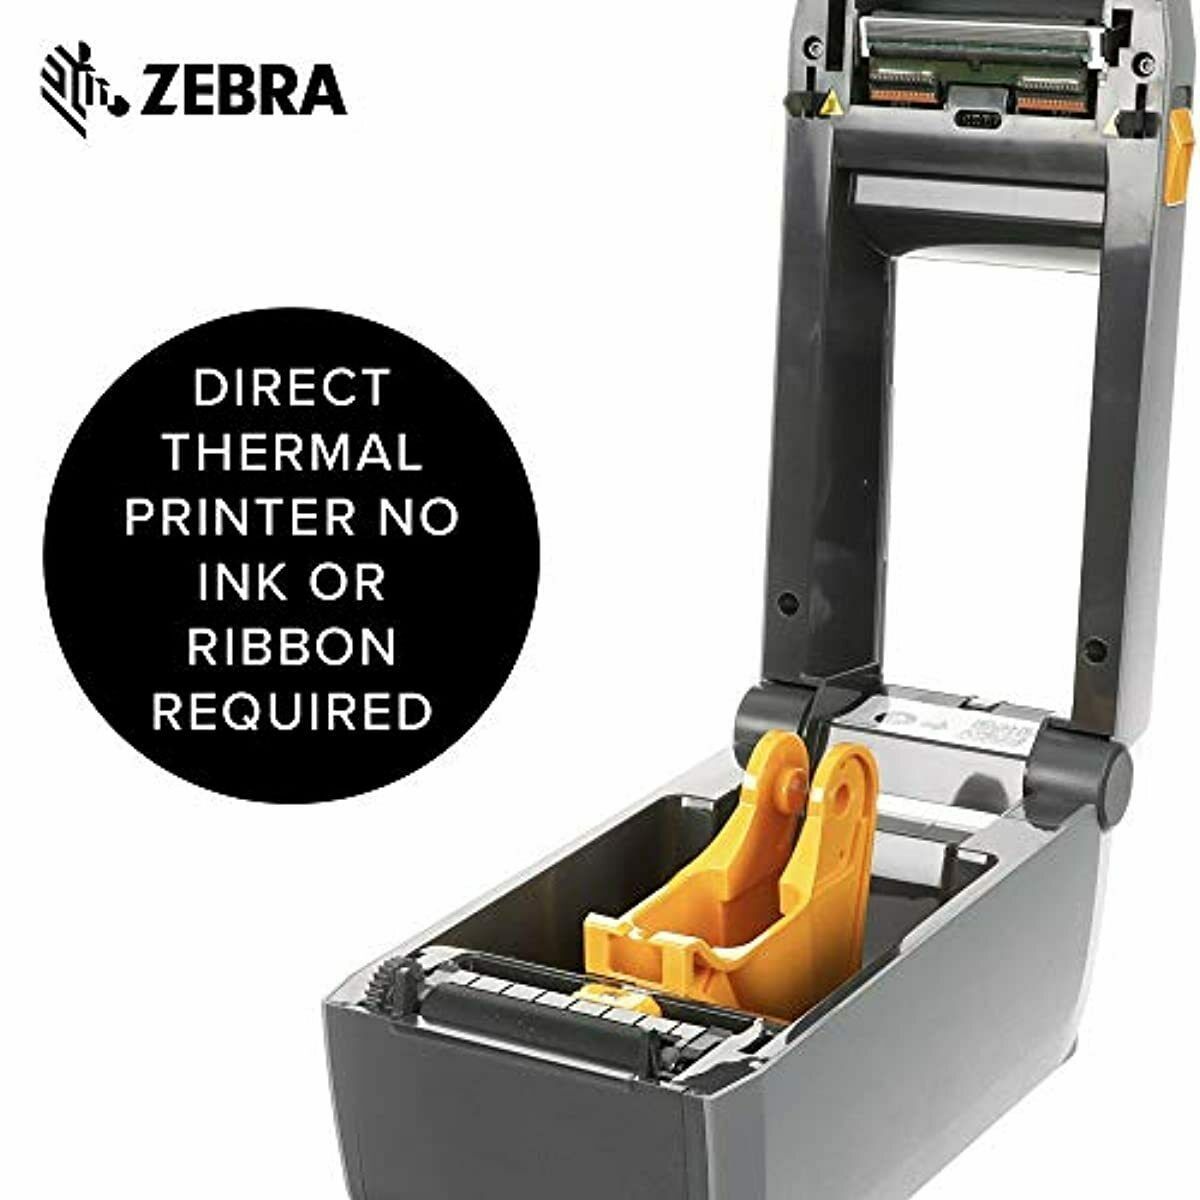 Zebra Zd410 Direct Thermal Desktop Printer For Labels Receipts Barcodes Tag Printers 3436